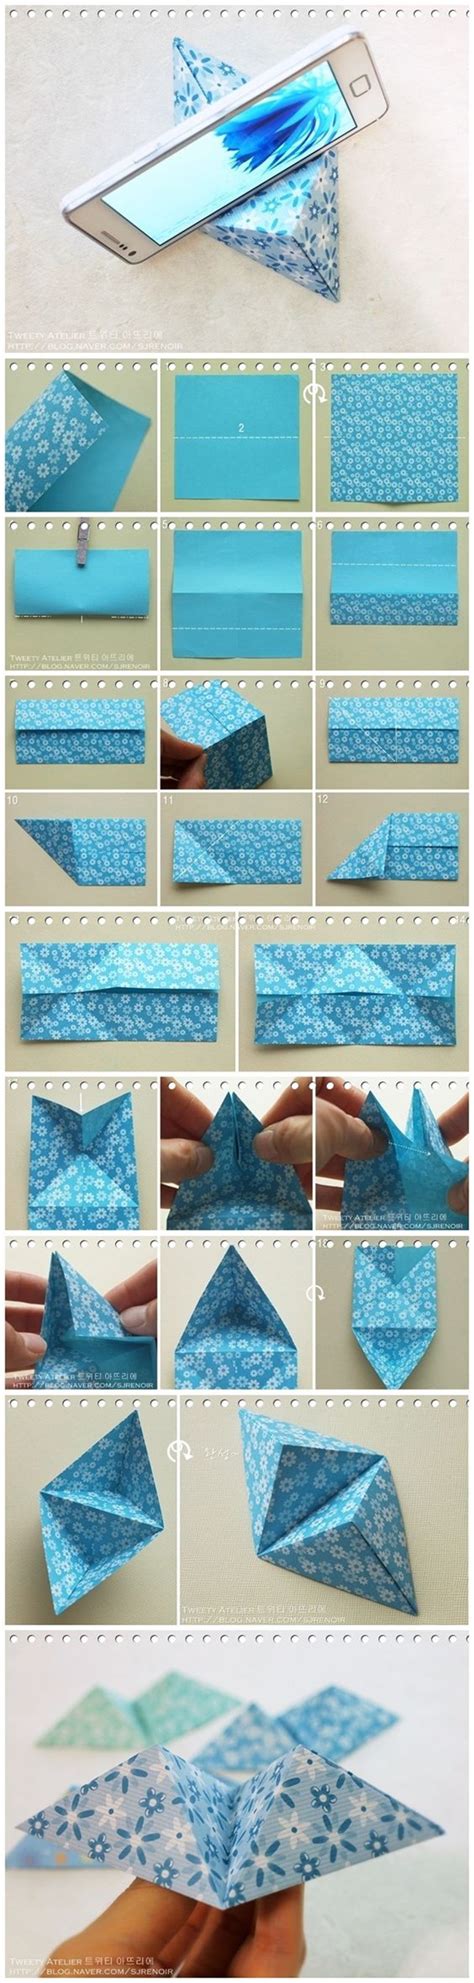 35 Diy Easy Origami Paper Craft Tutorials Step By Step Page 3 Of 4